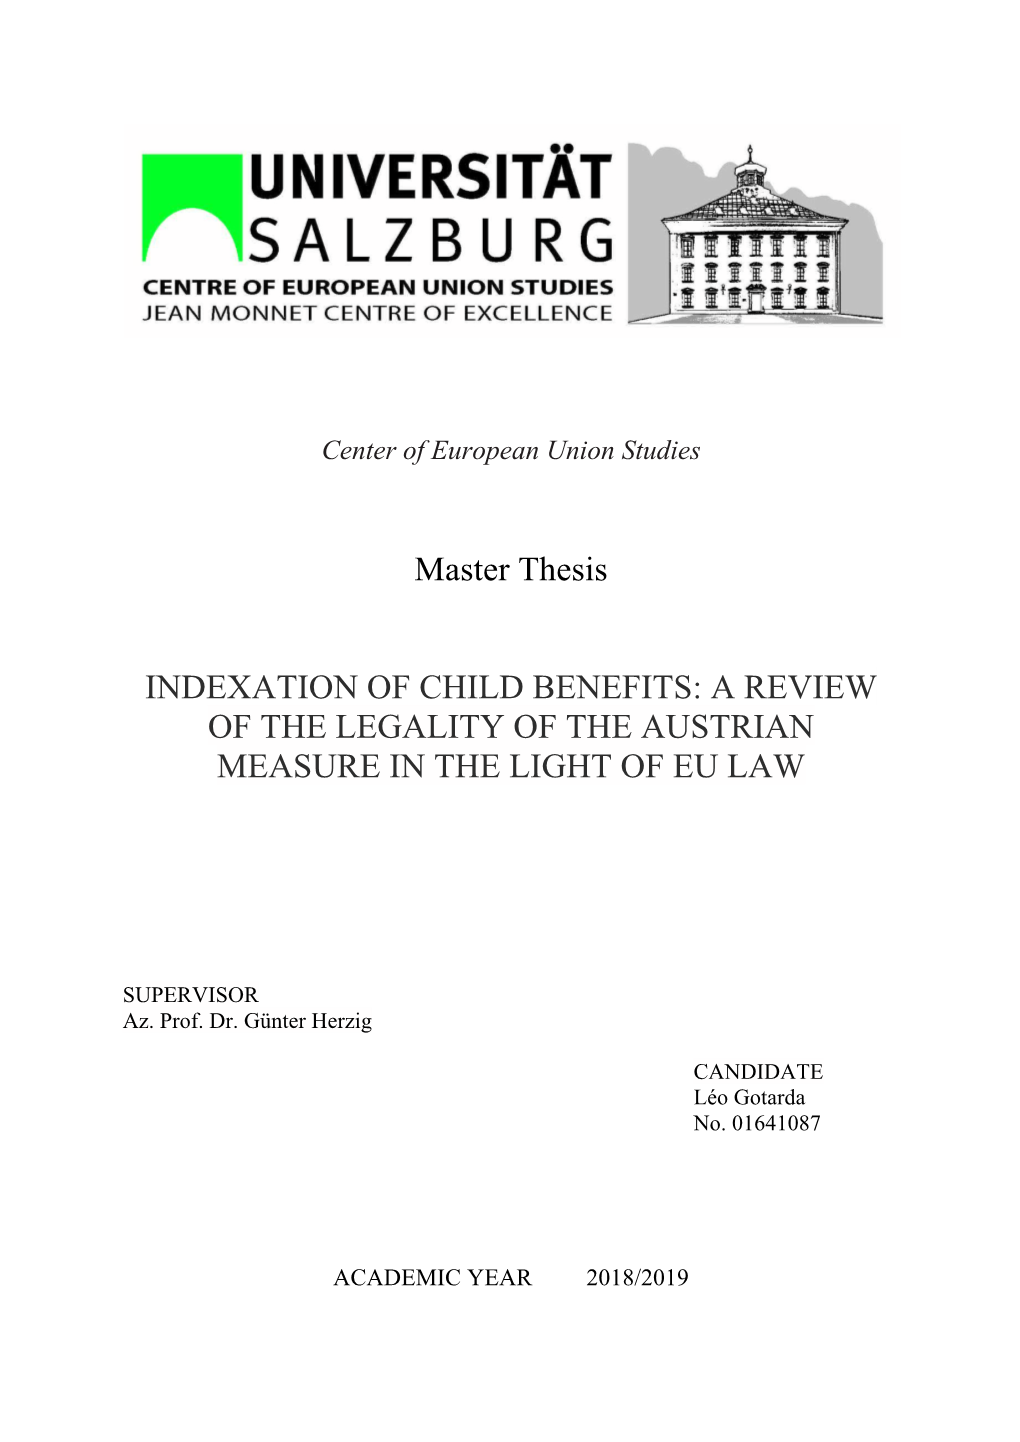 Master Thesis INDEXATION of CHILD BENEFITS: a REVIEW of the LEGALITY of the AUSTRIAN MEASURE in the LIGHT of EU